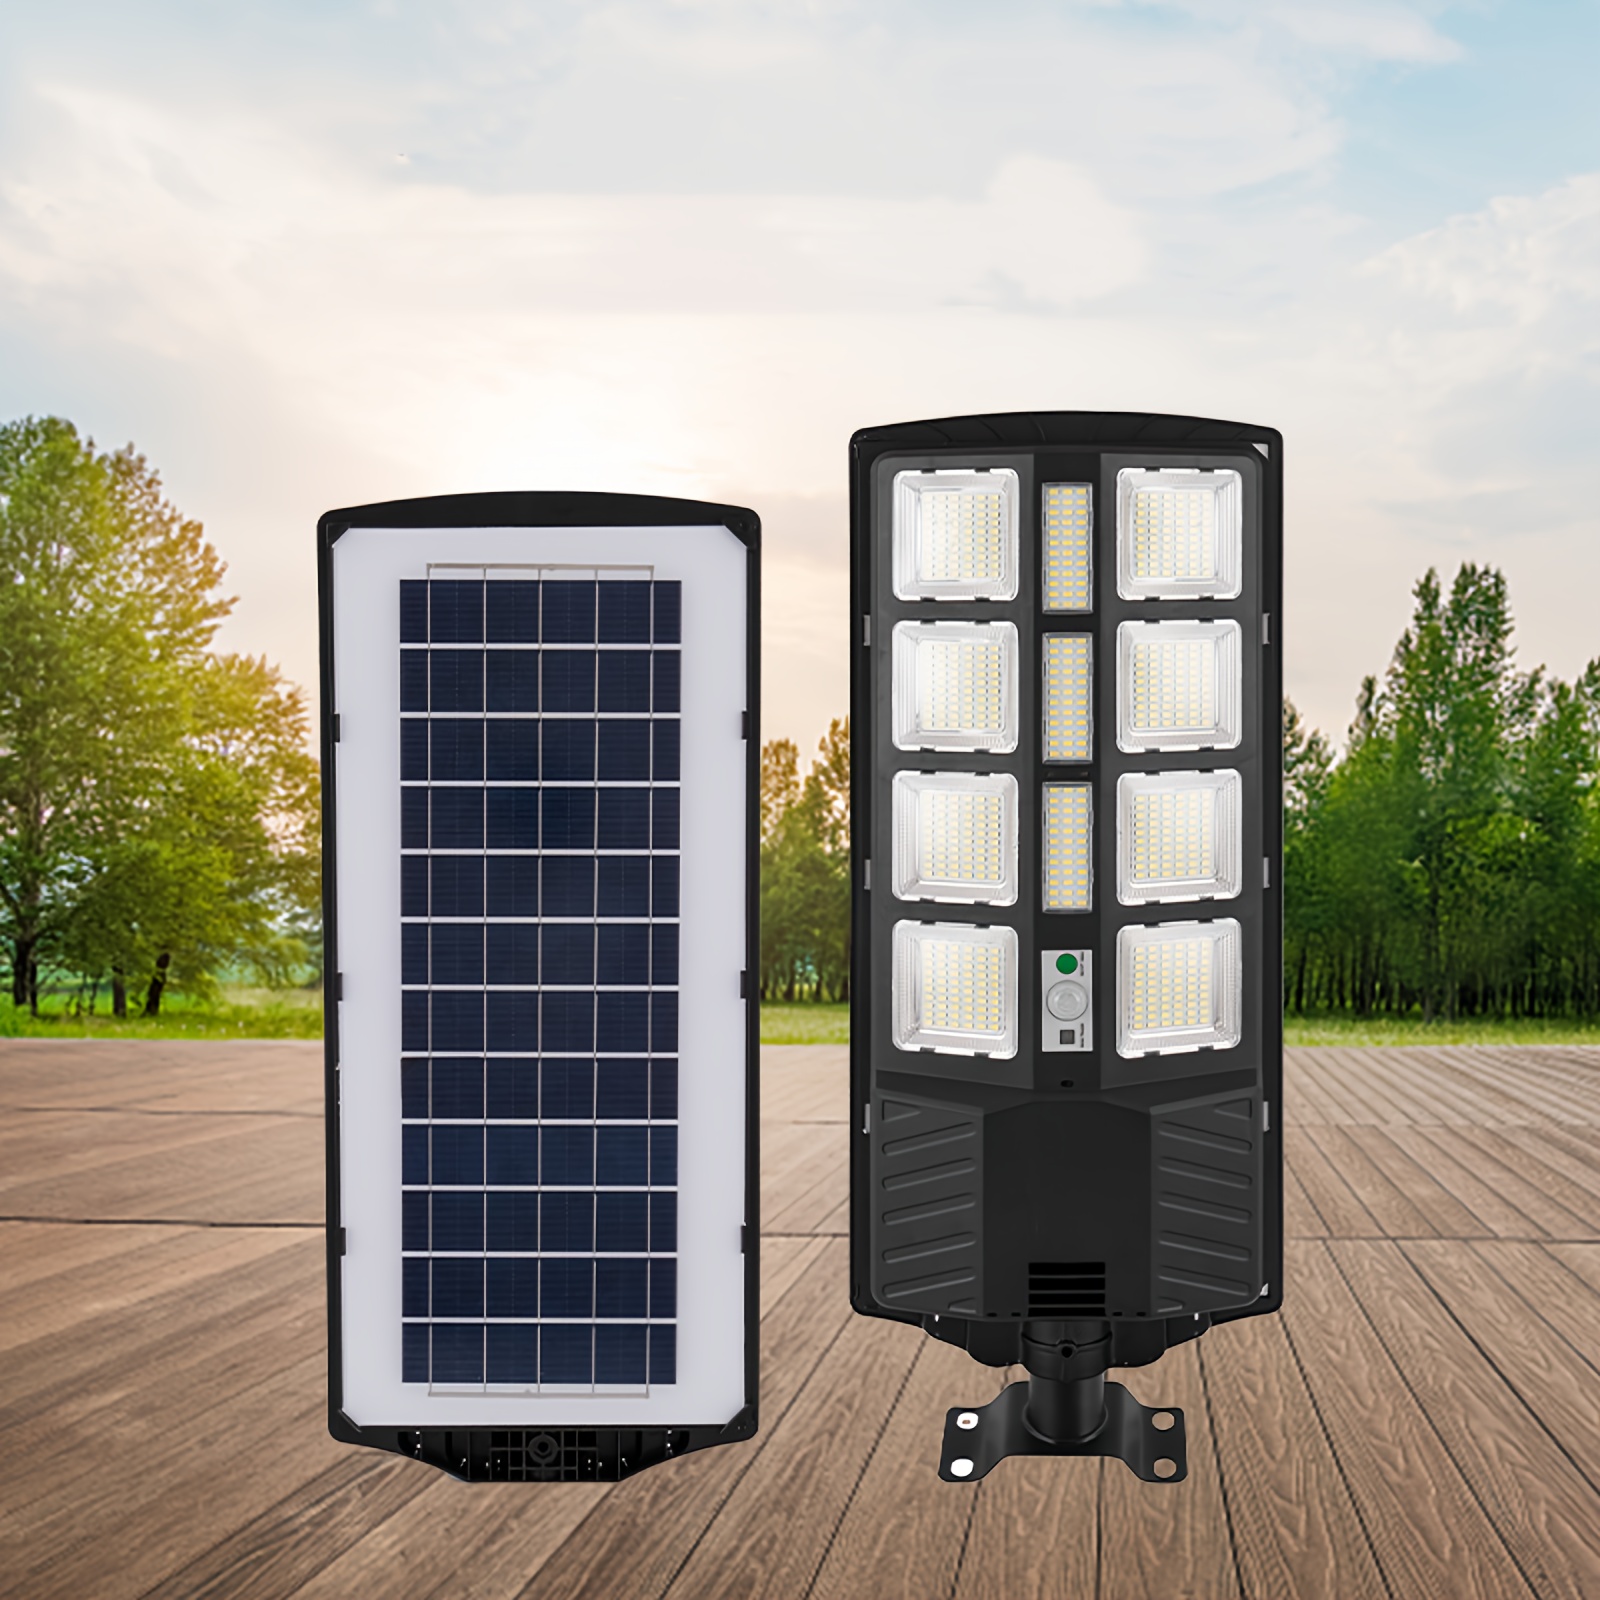 1pc 300w integrated human body sensing and intelligent light controlled solar light suitable for courtyards farms roads and front doors free shrink rod remote control wall installation package details 2